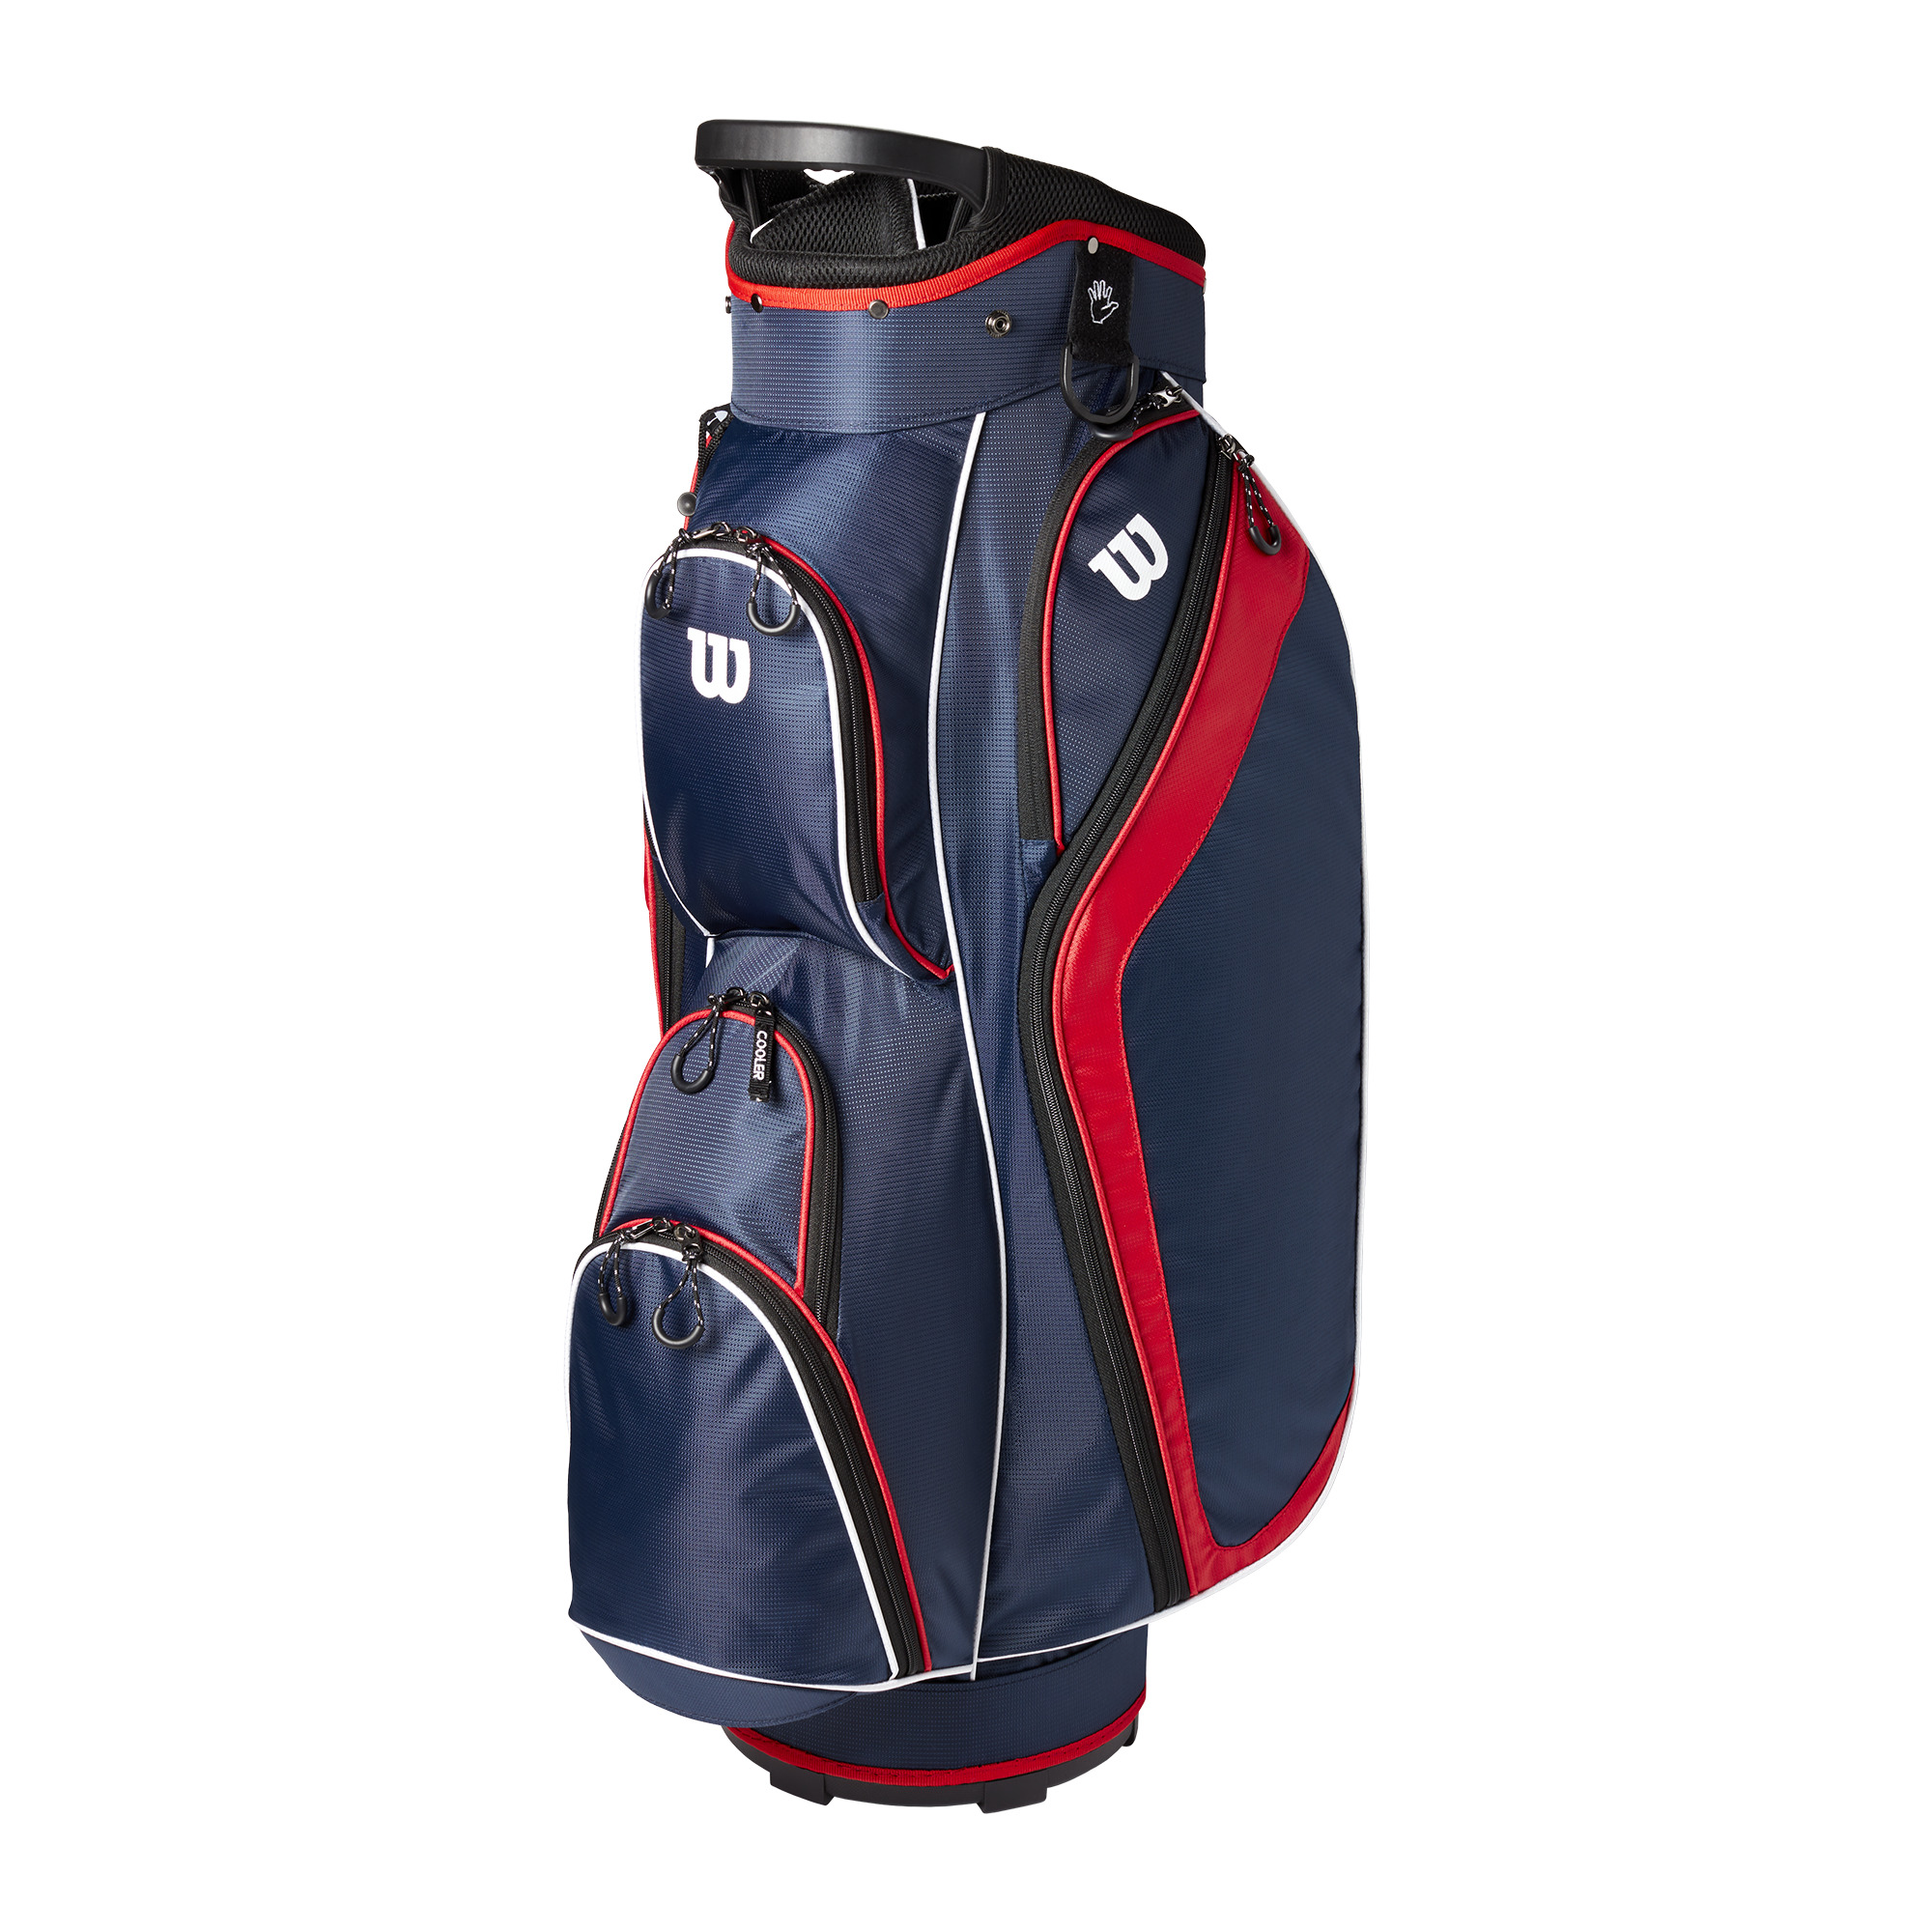 Wilson W Tour Cart Golf Bag, 14 Way Divider, Navy/Red/White - image 1 of 4